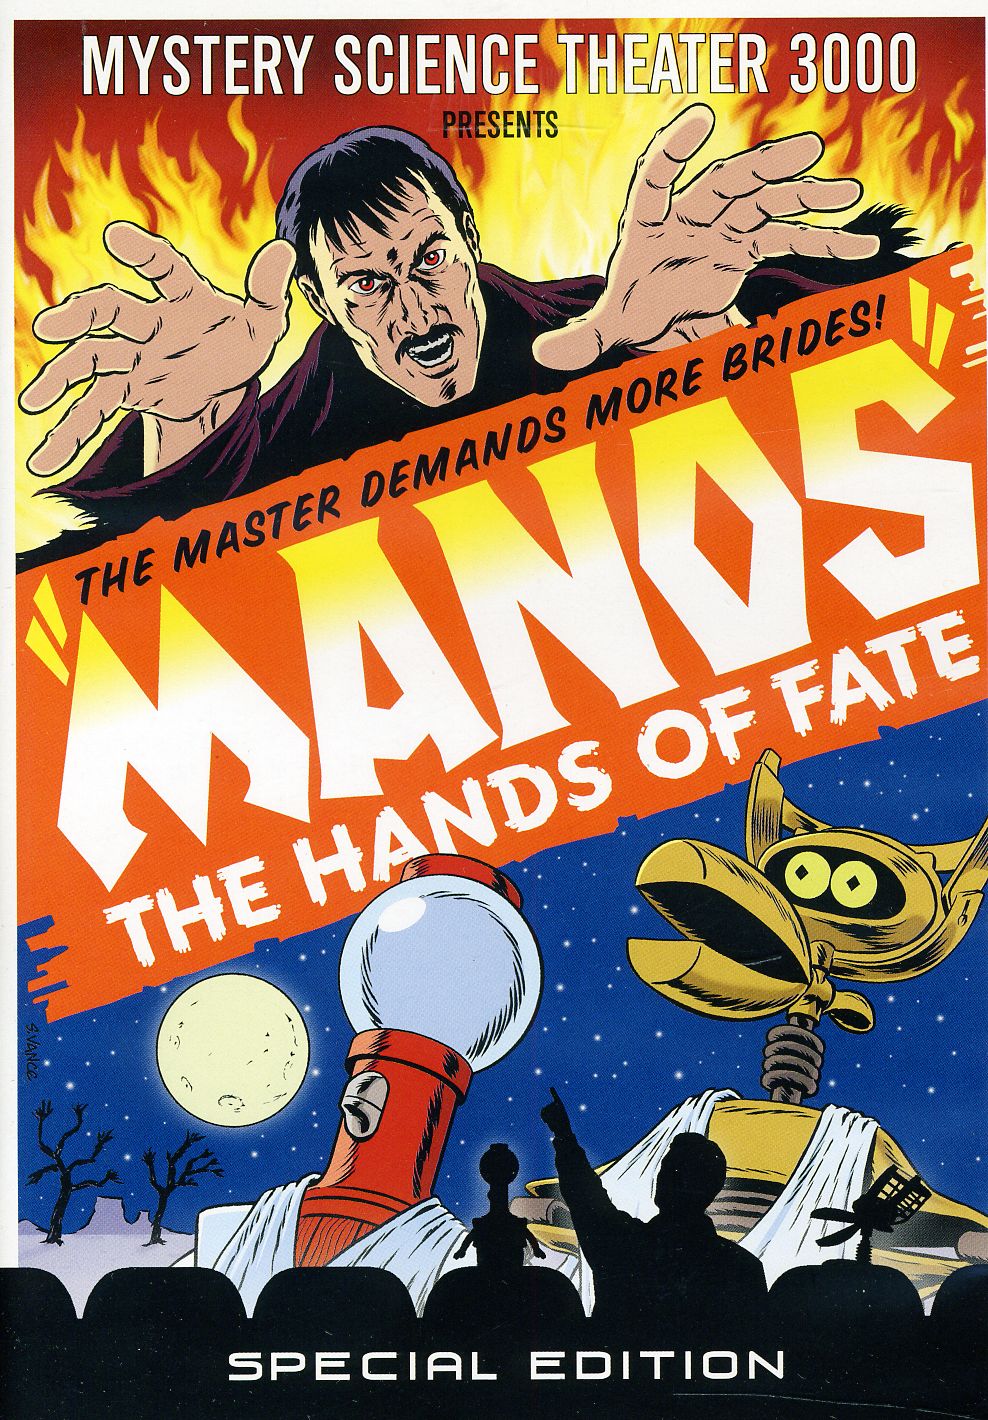 MYSTERY SCIENCE THEATER 3000: MANOS HAND OF FATE